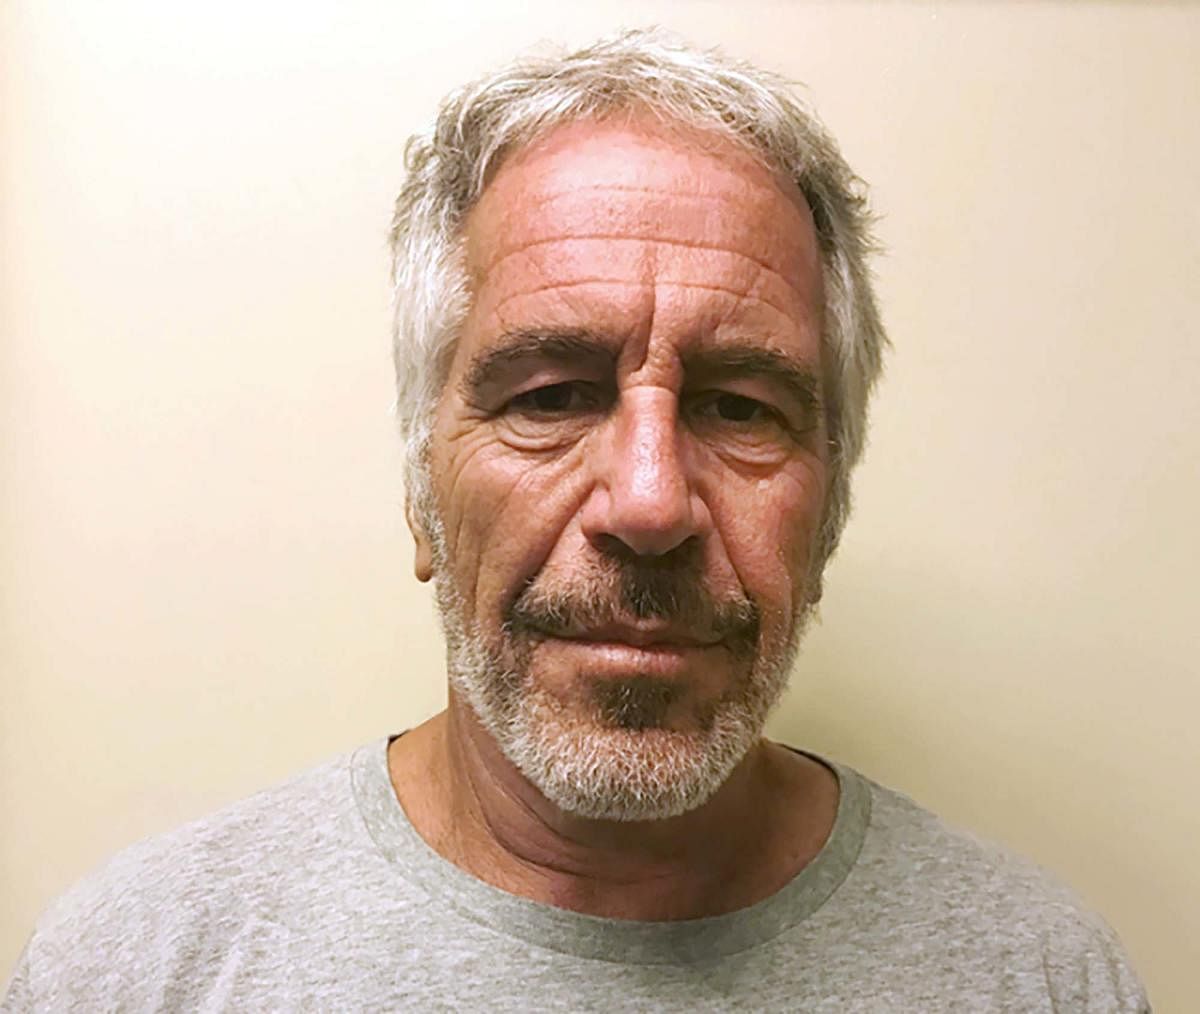 The chief prosecutor in Paris opened a preliminary inquiry to determine Epstein had committed any sex crimes on French territory or against any underage French victims in late August.